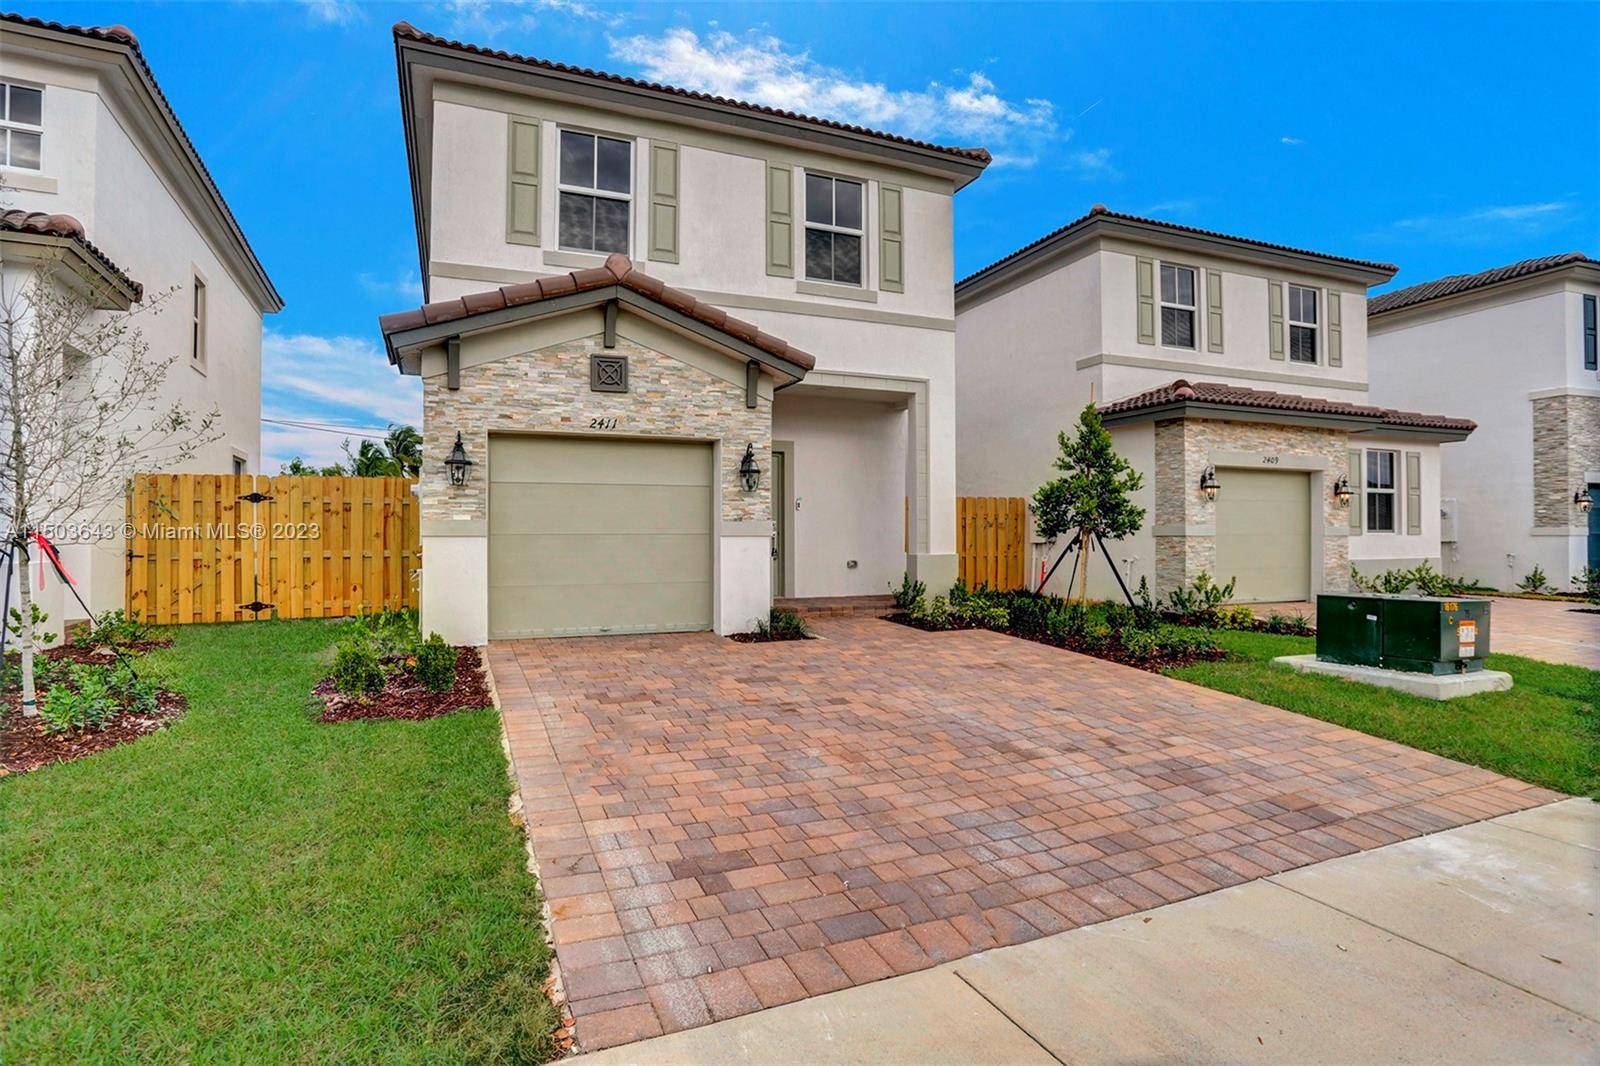 Located in north Miami, FL, Westview is a masterplan community of new single family homes !